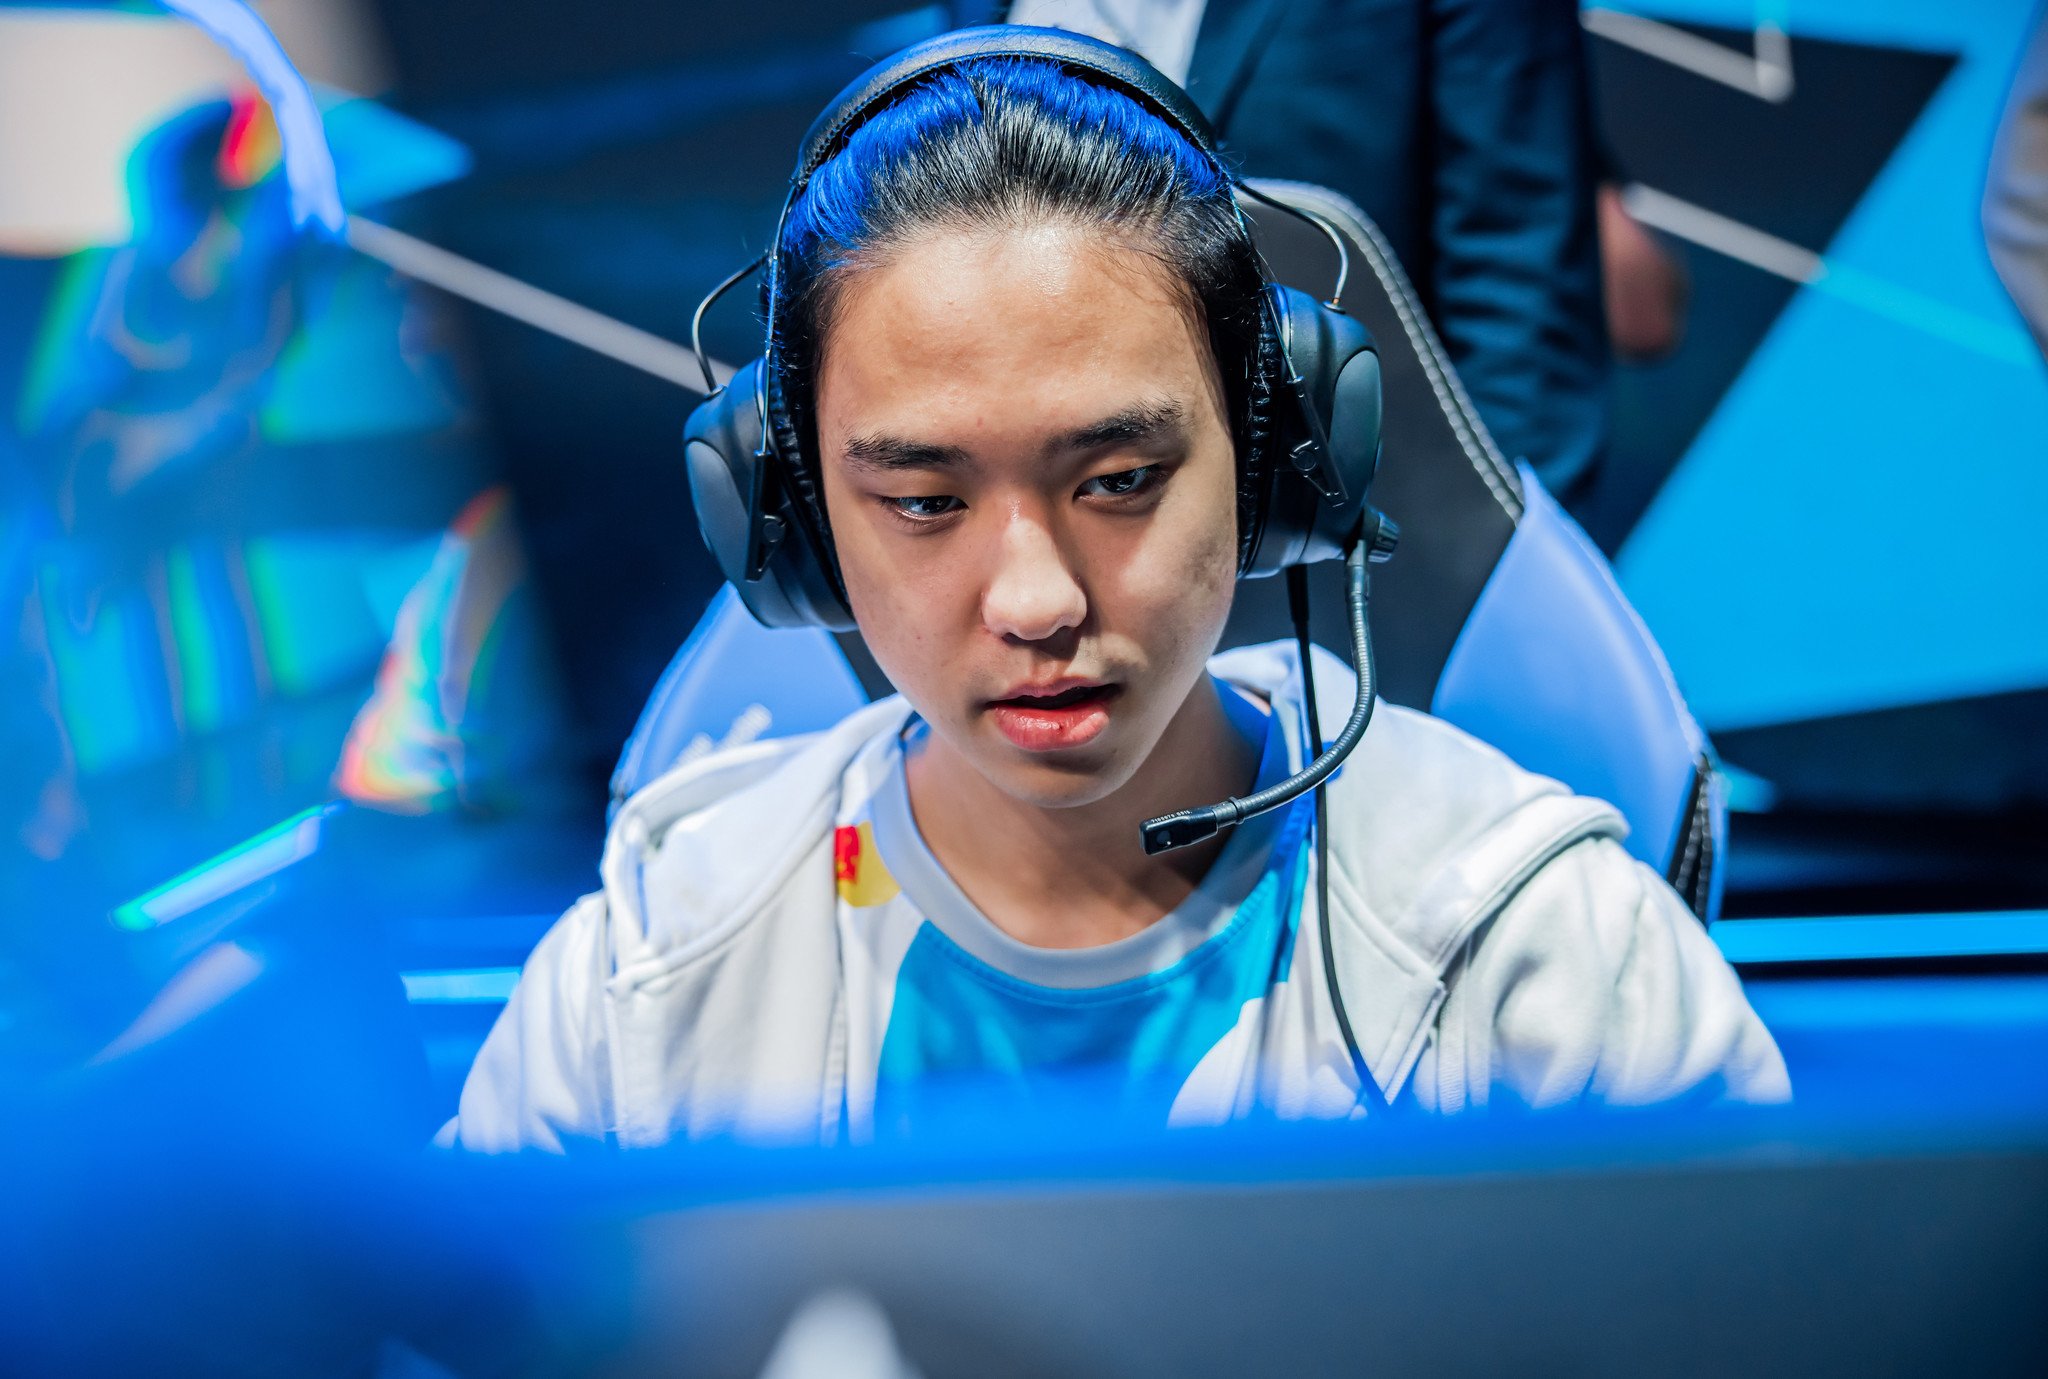 C9 book their ticket to 2023 LCS Spring Playoffs finals and earn NA's